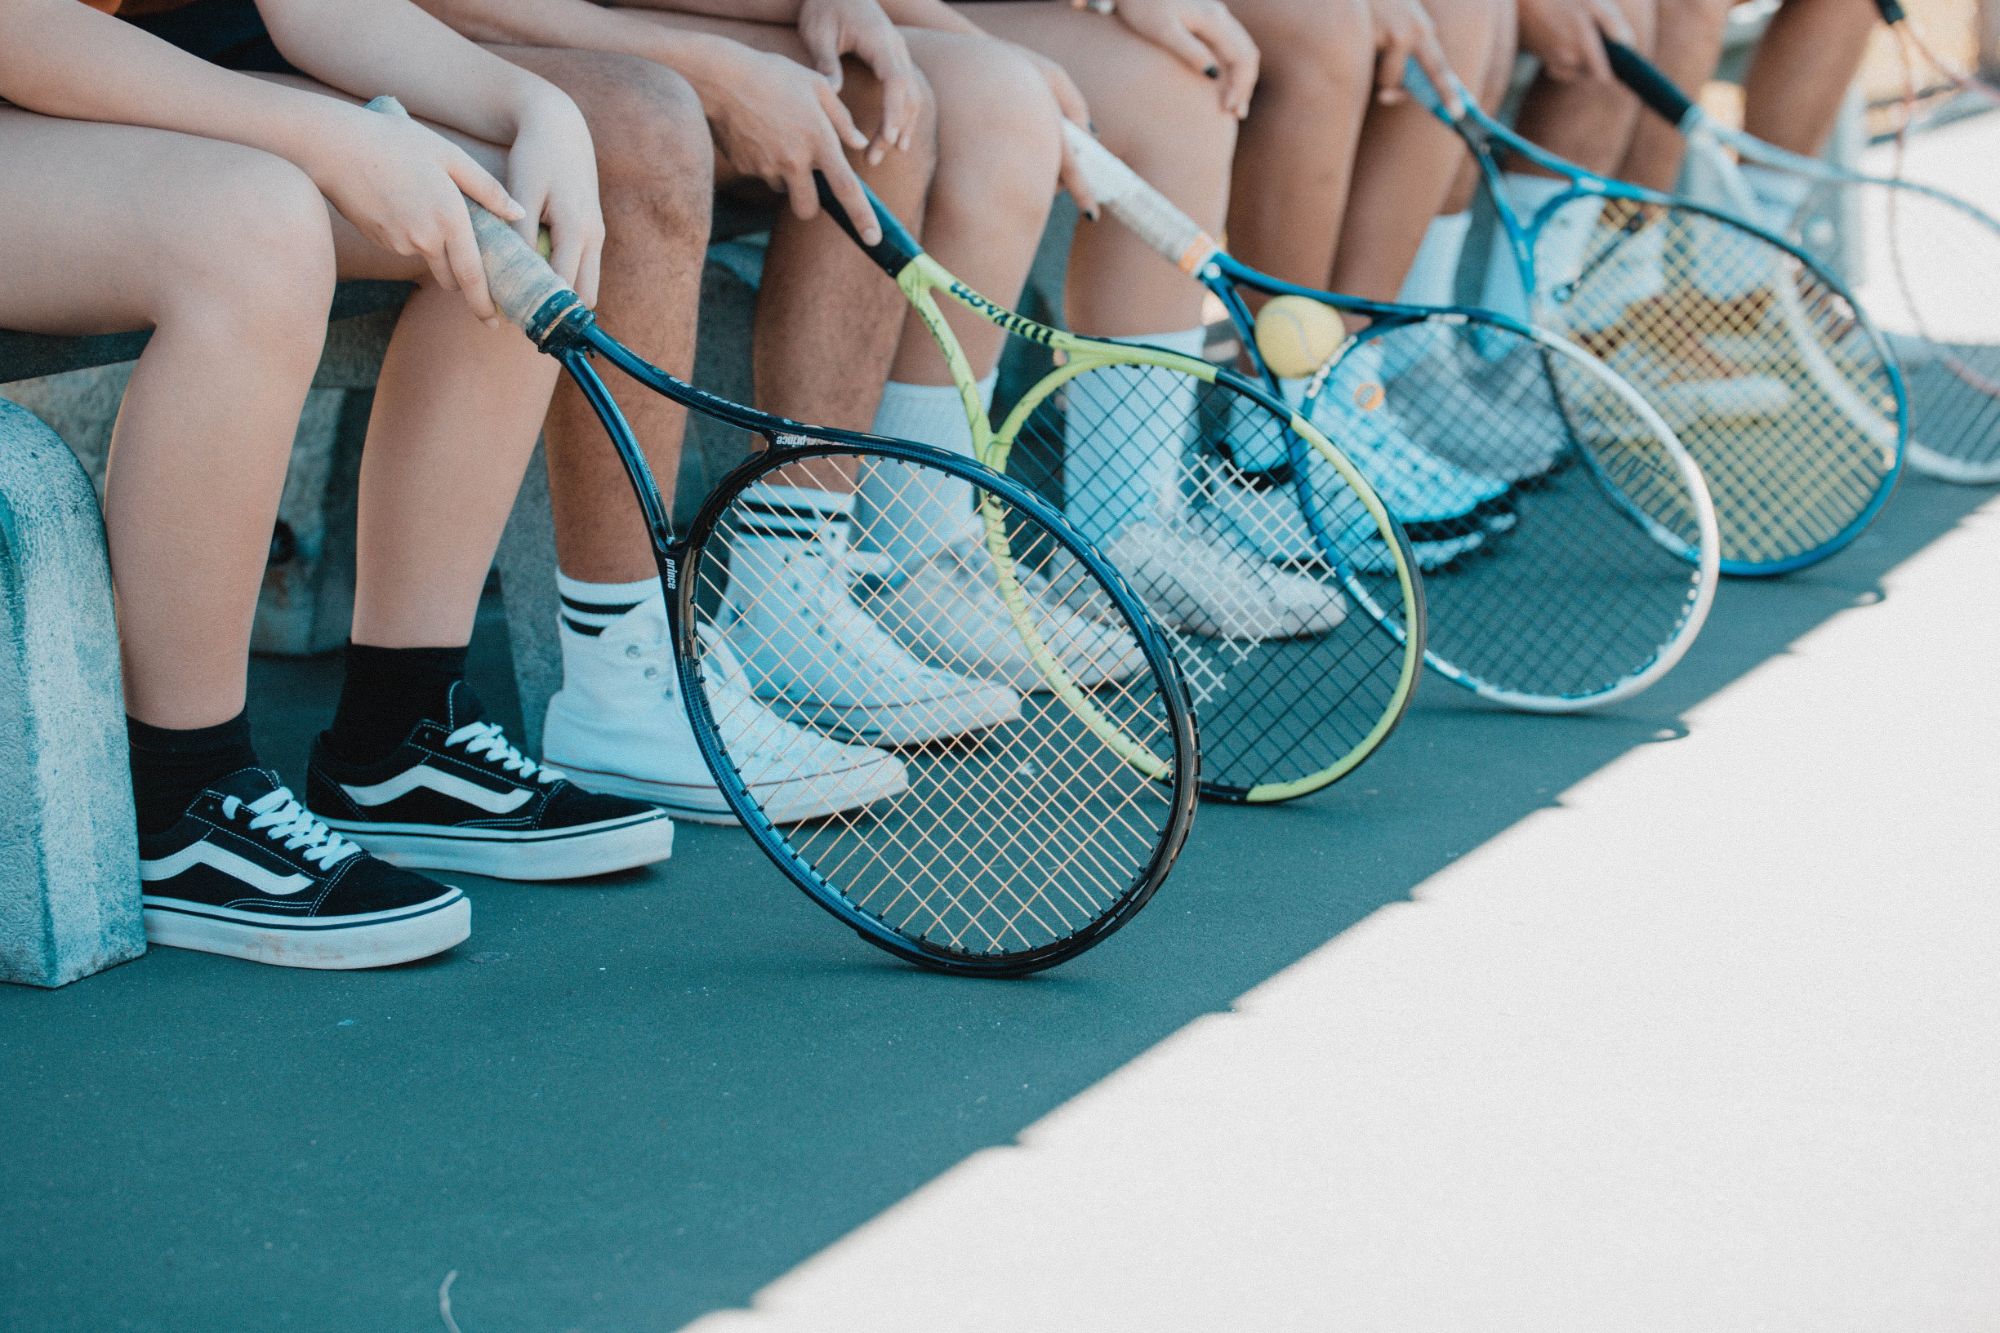 tennis is one of the popular sports in spain